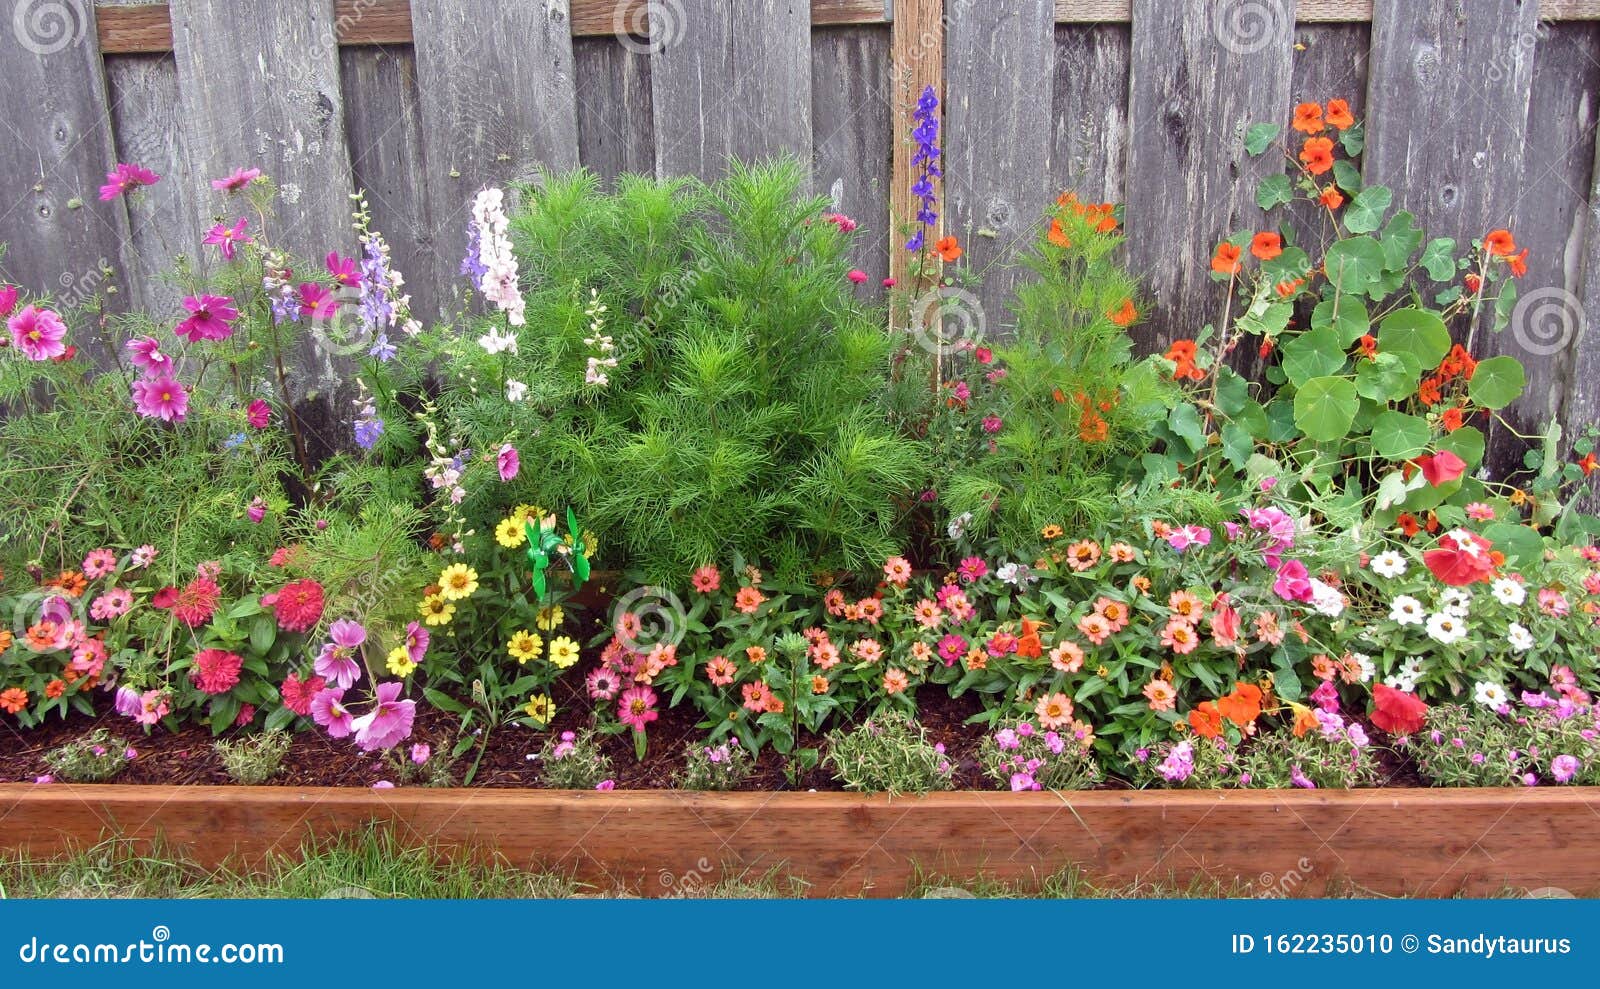 flower box, large raised bed with vibrant annuals and perennials